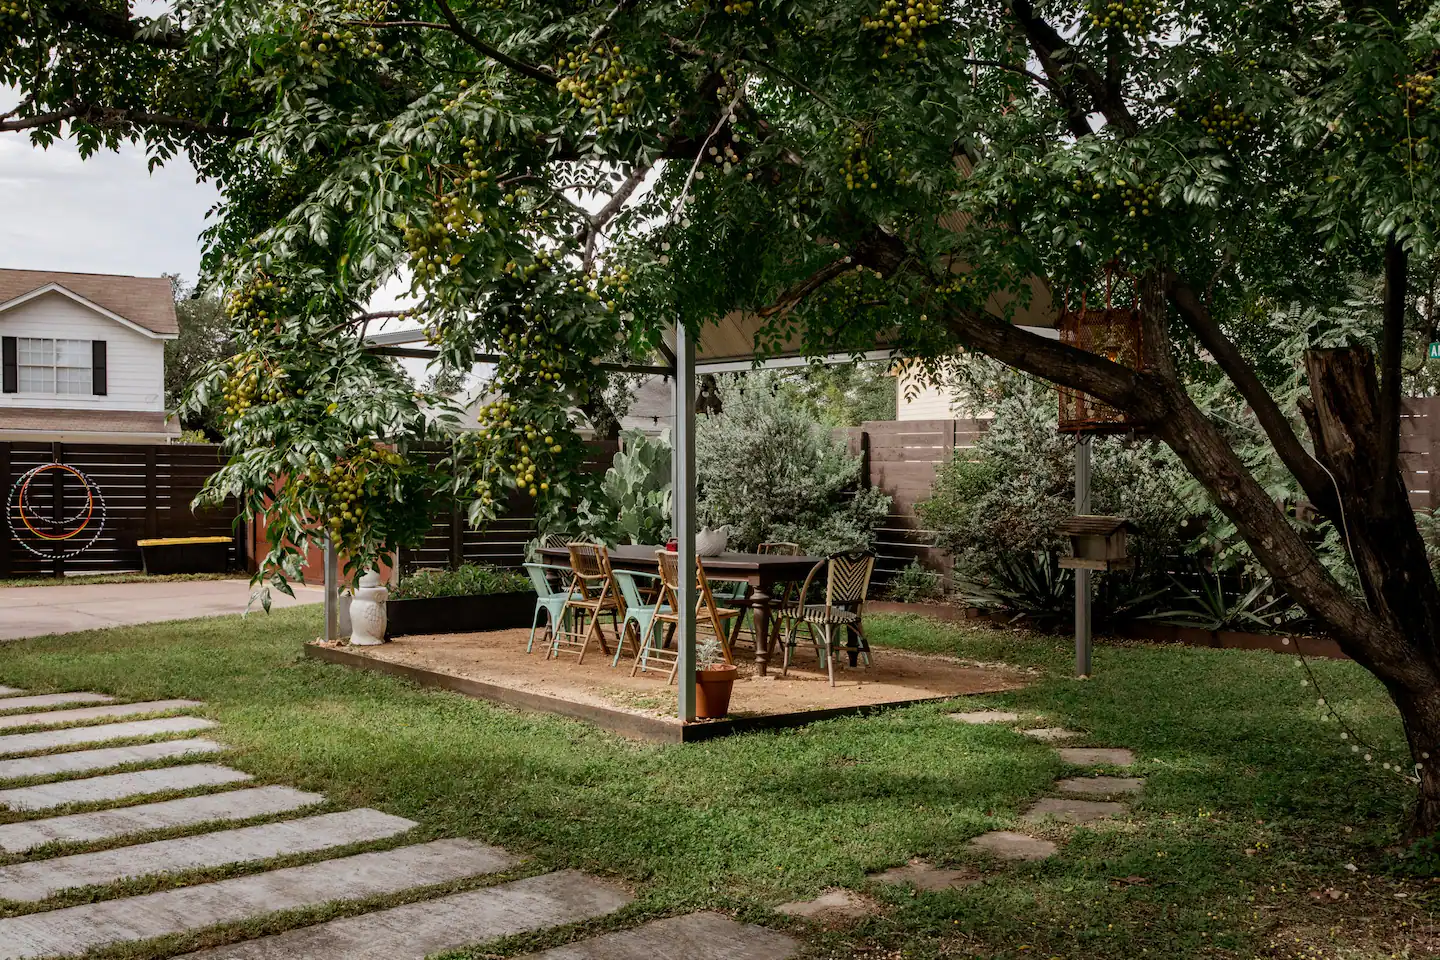 Our massive back yard includes a covered dining table, BBQ and a fire pit.